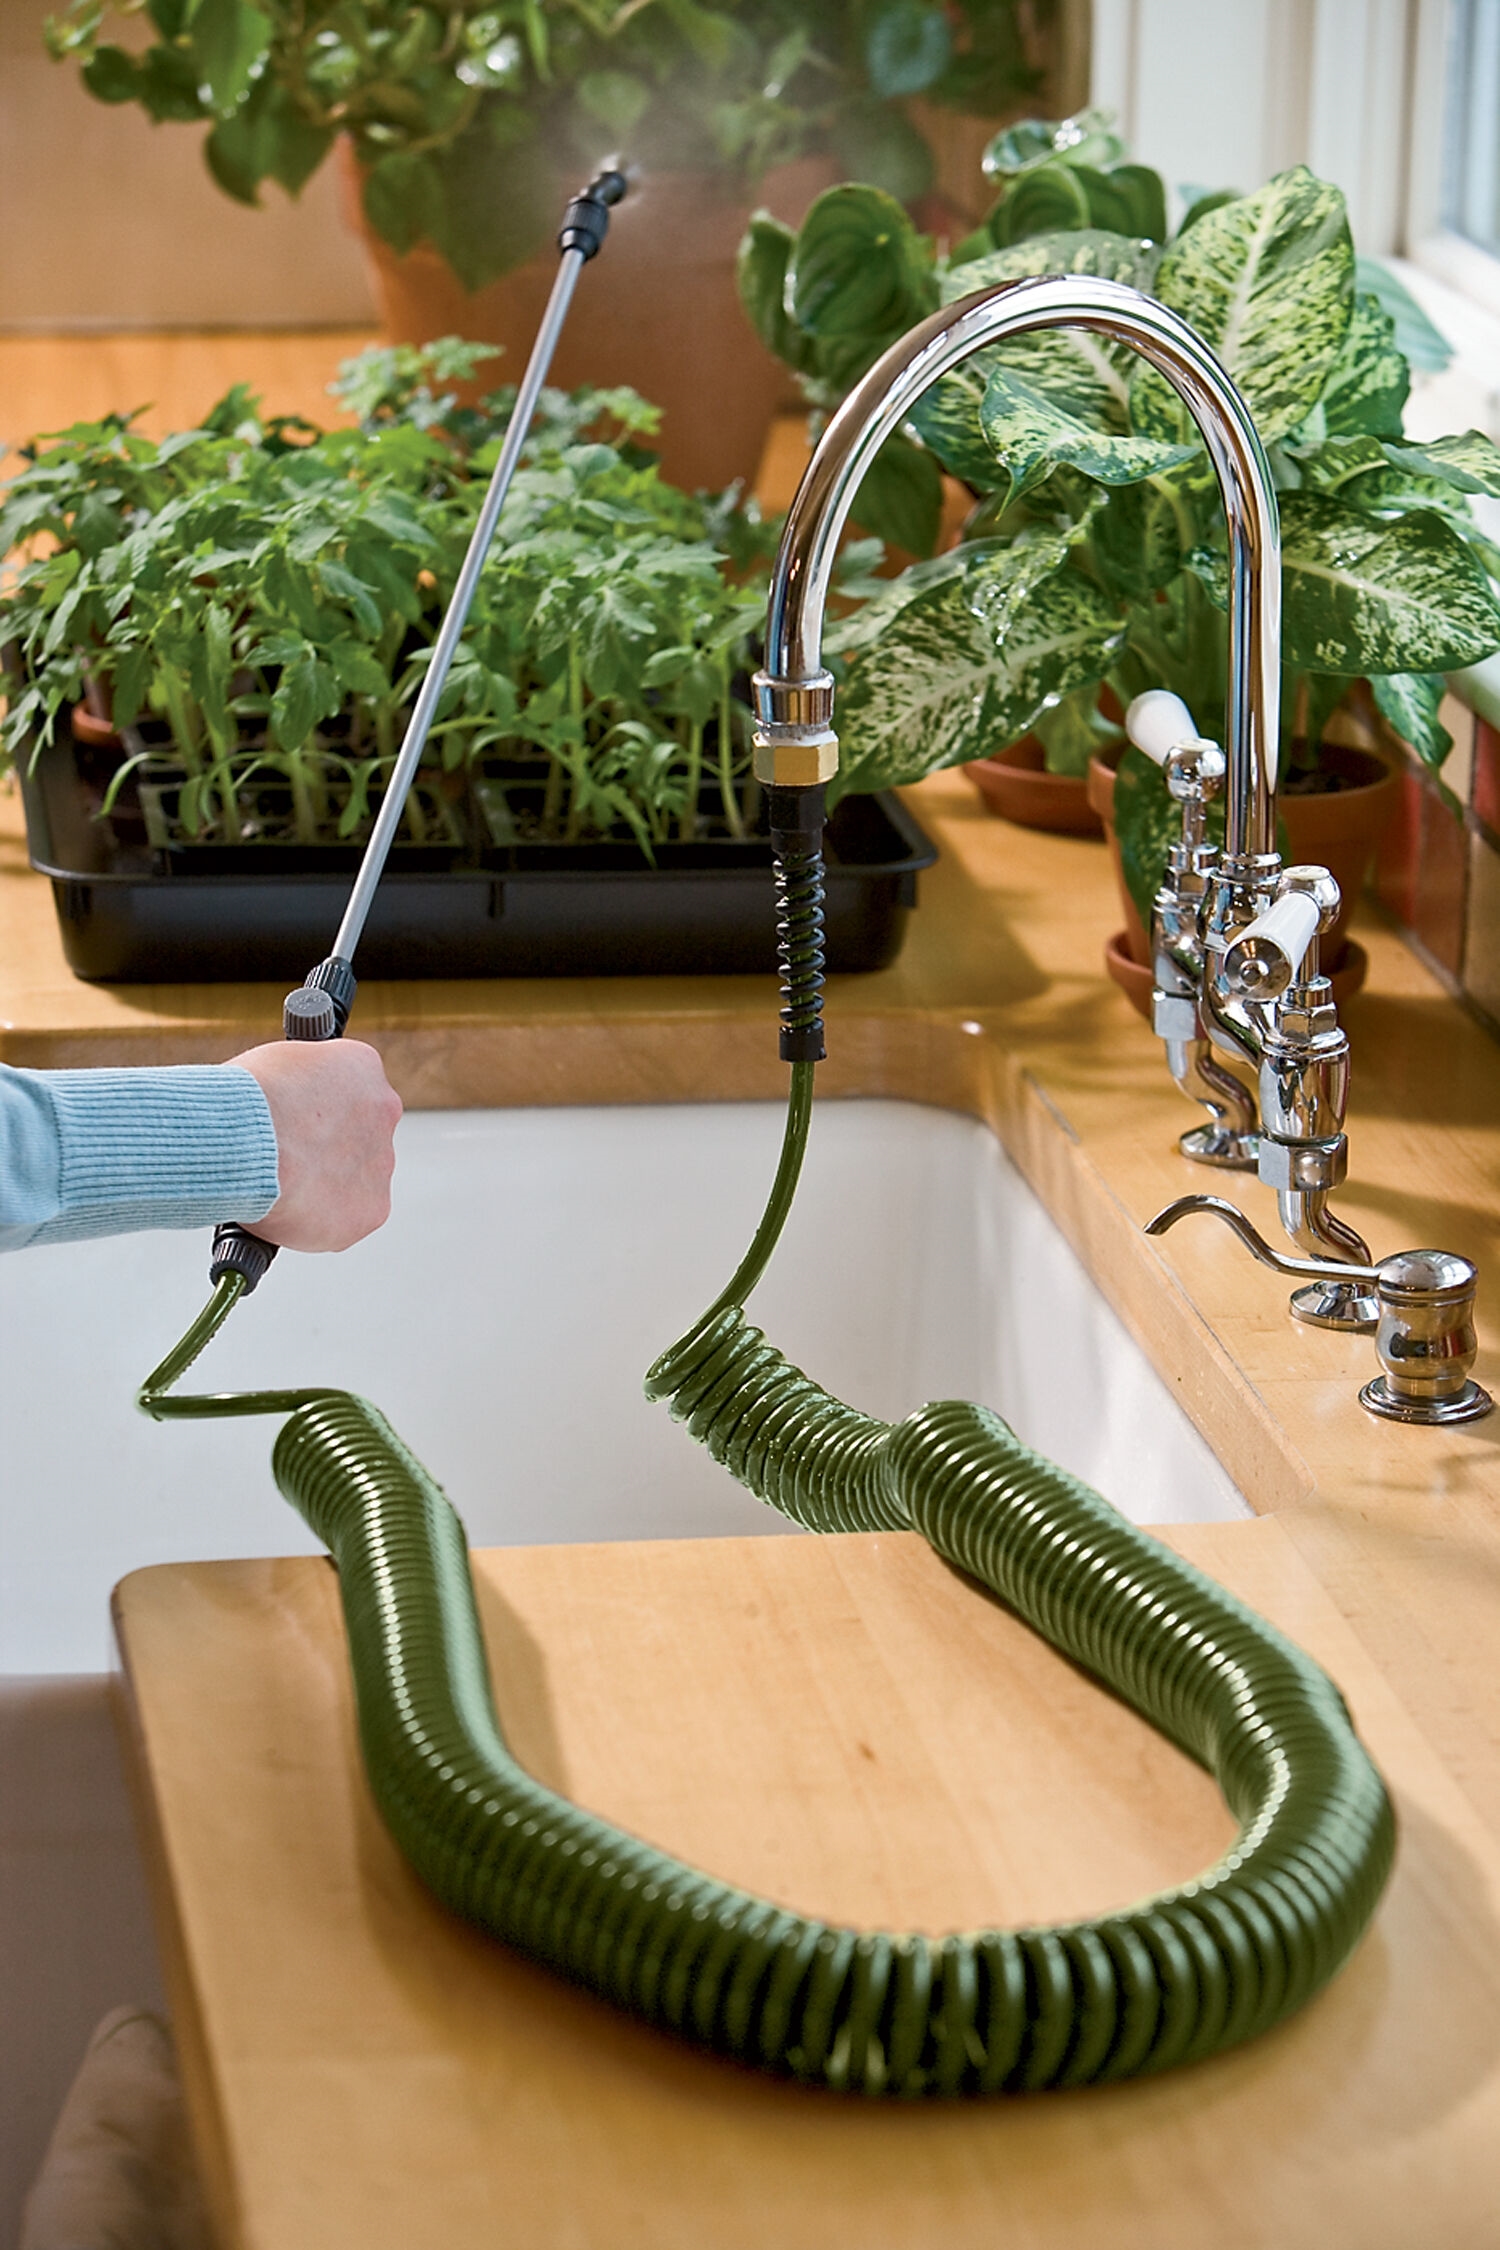 Indoor Plant Watering Hose Houseplant, How To Install A Garden Hose Sink